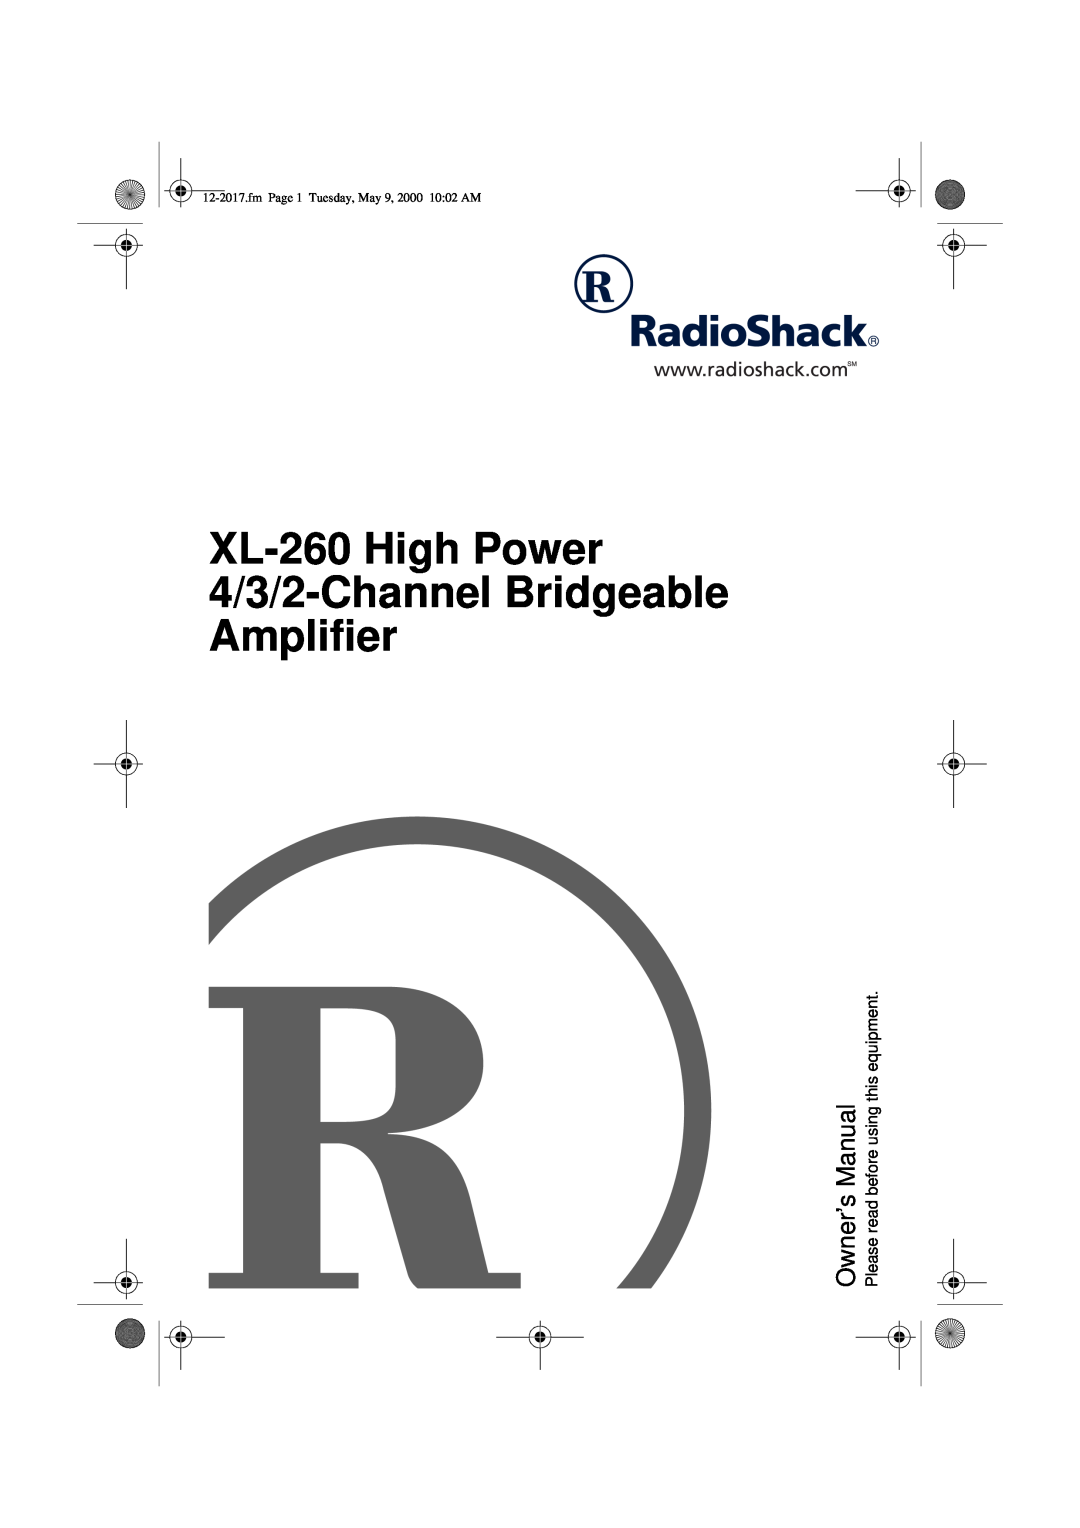 Radio Shack owner manual XL-260High Power 4/3/2-ChannelBridgeable, Amplifier, fmPage 1 Tuesday, May 9, 2000 10 02 AM 